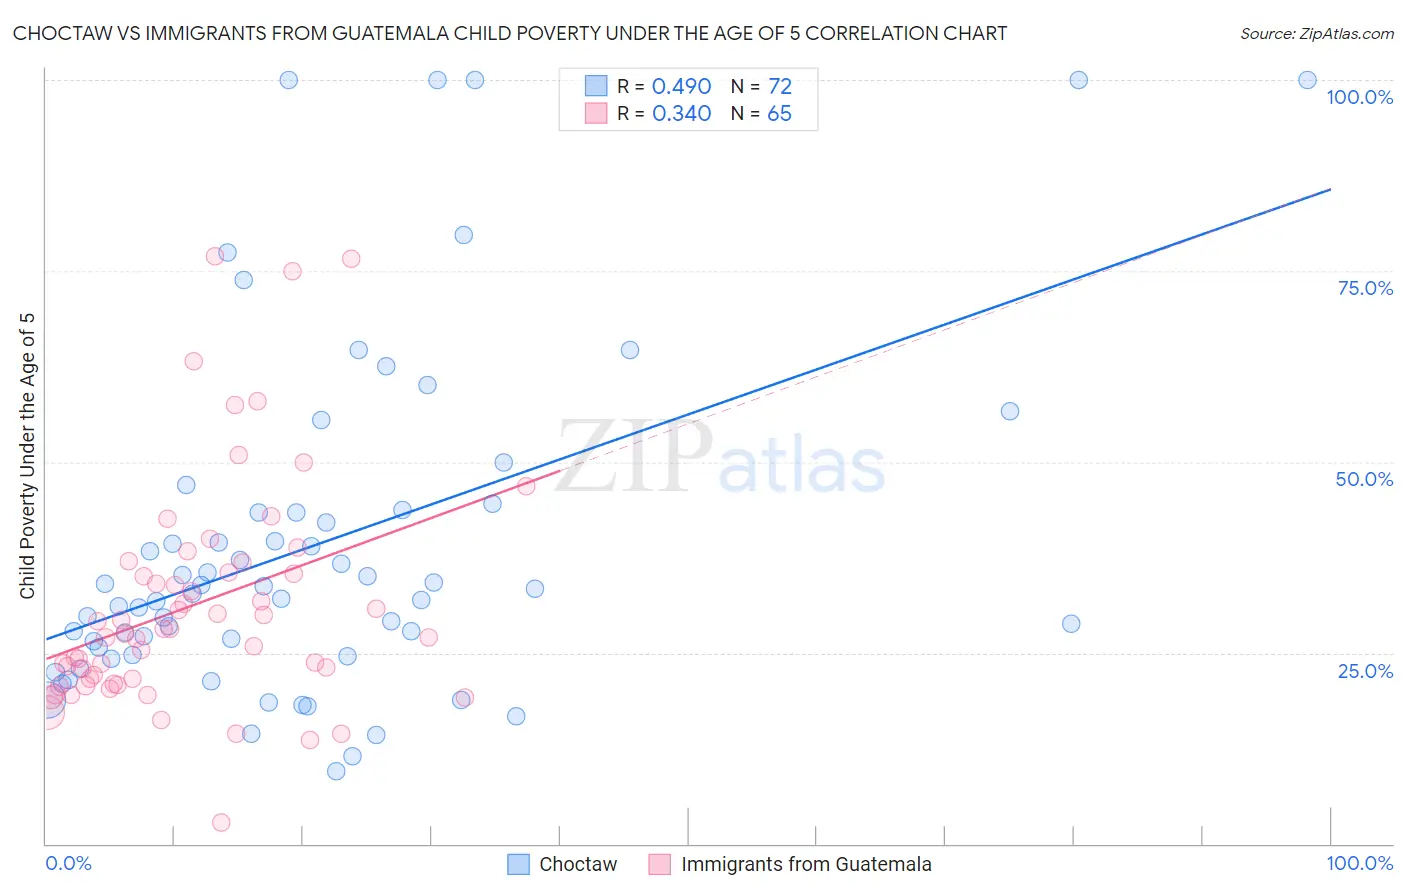 Choctaw vs Immigrants from Guatemala Child Poverty Under the Age of 5